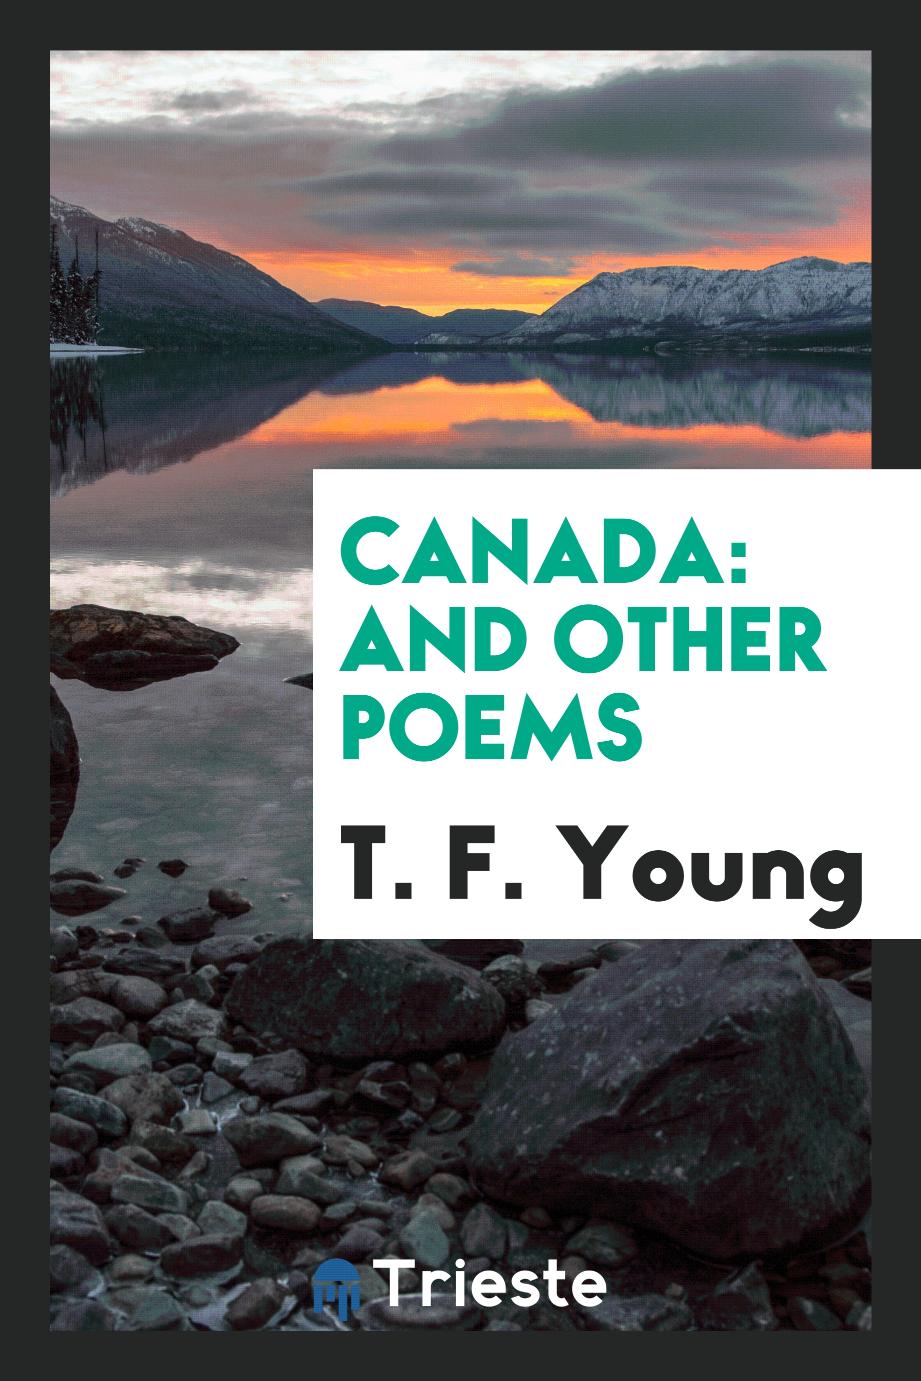 Canada: And Other Poems